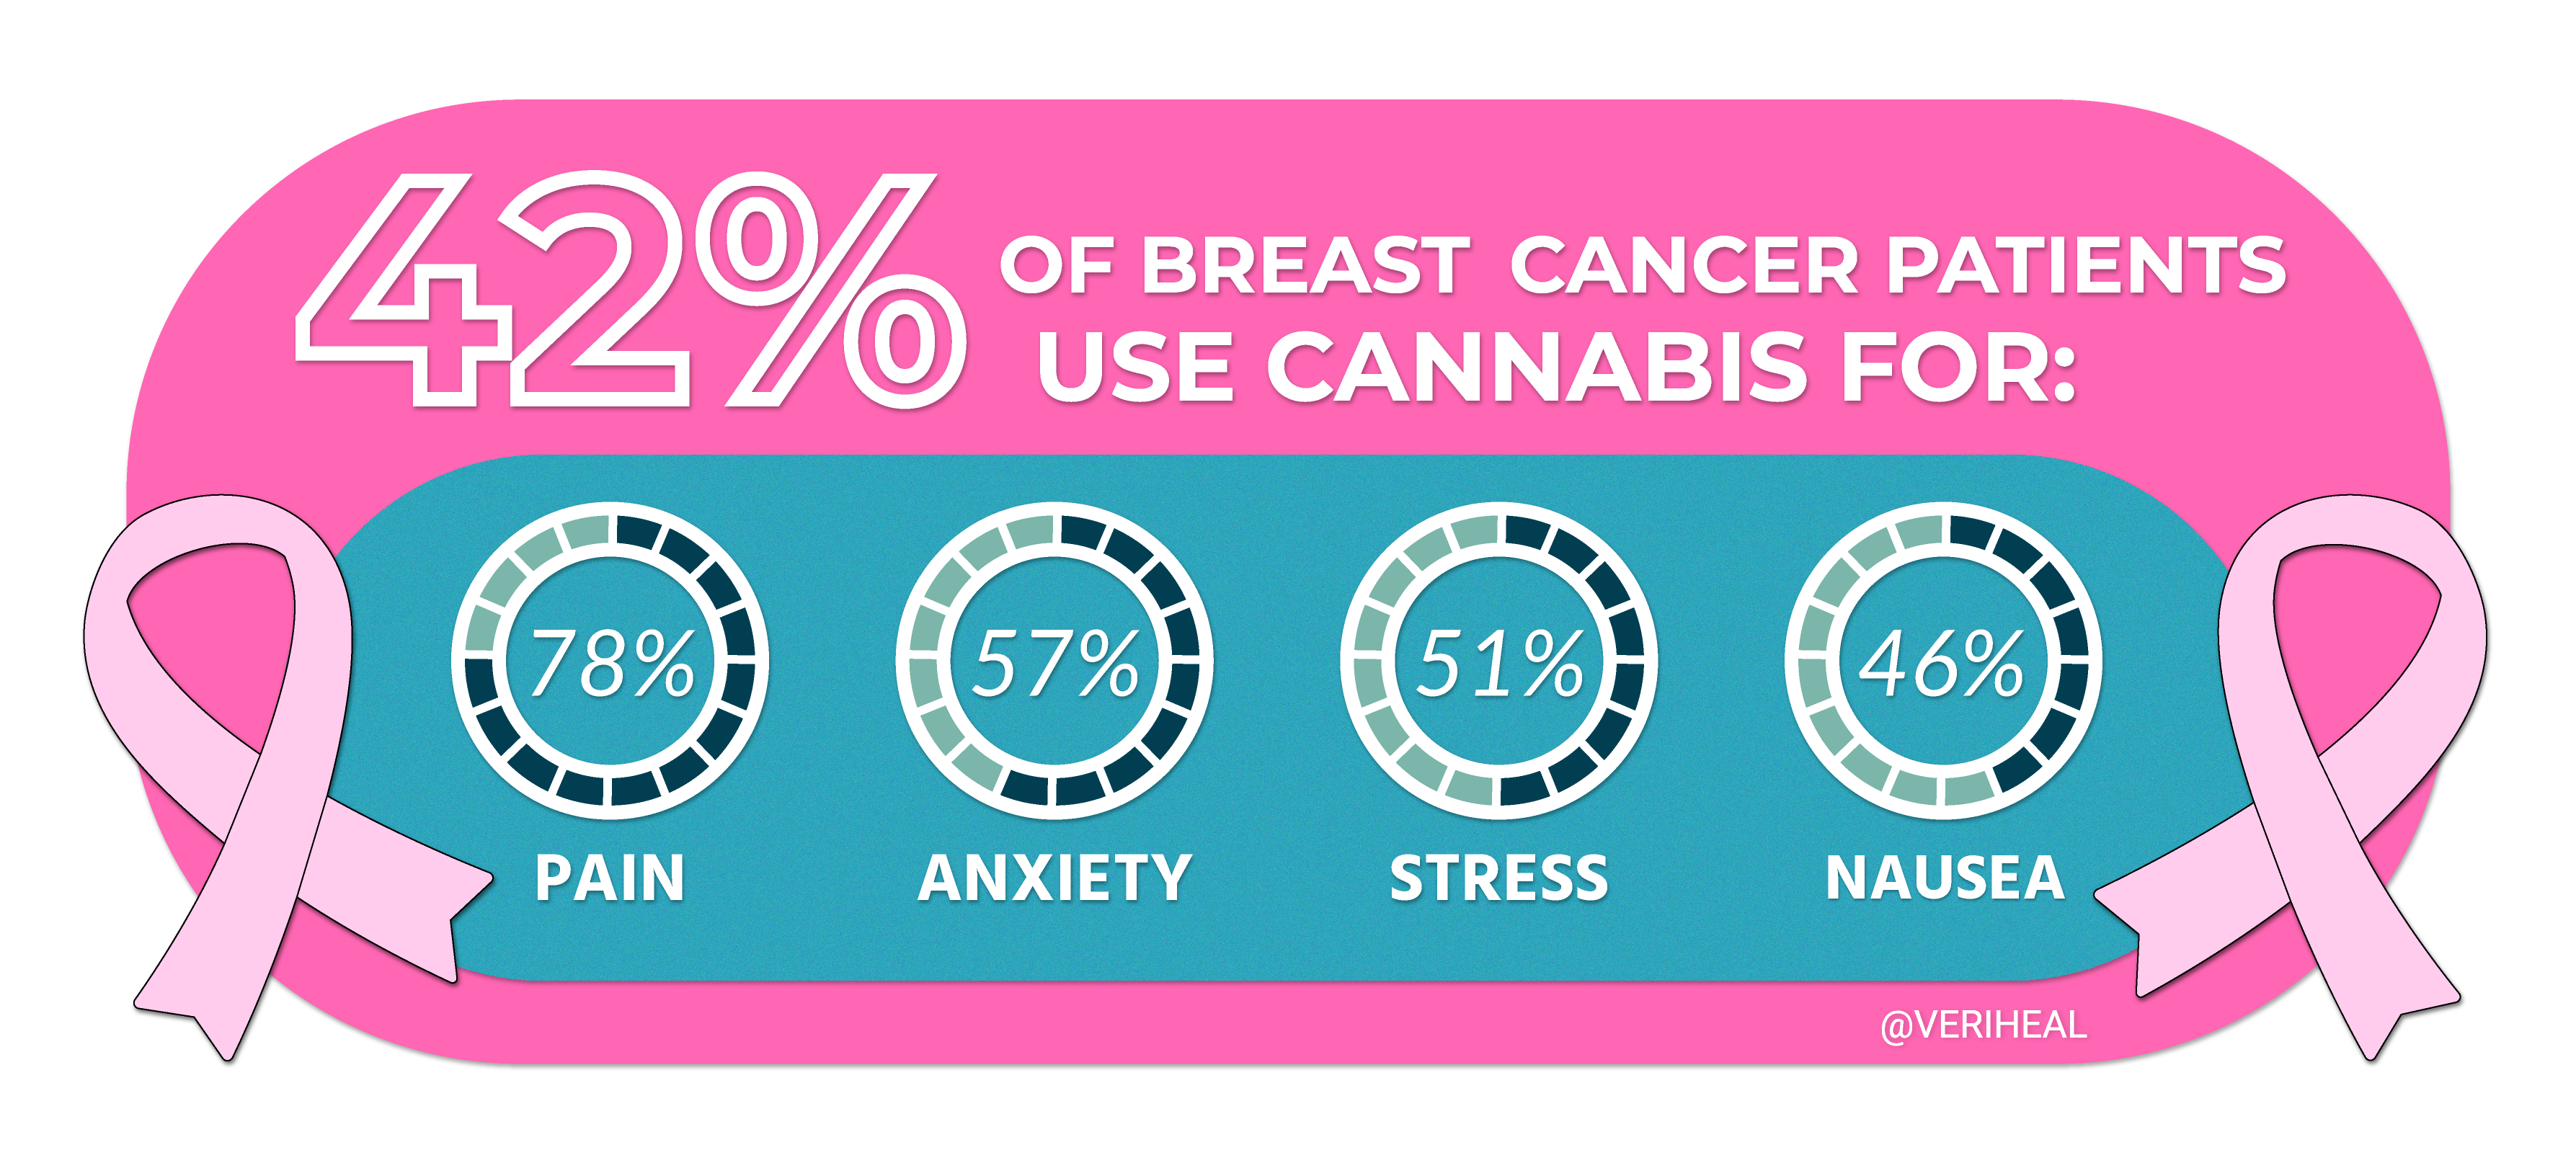 Infographic-A-New-Study-Explores-Patient-Interest-in-Medical-Cannabis-to-Manage-Breast-Cancer-